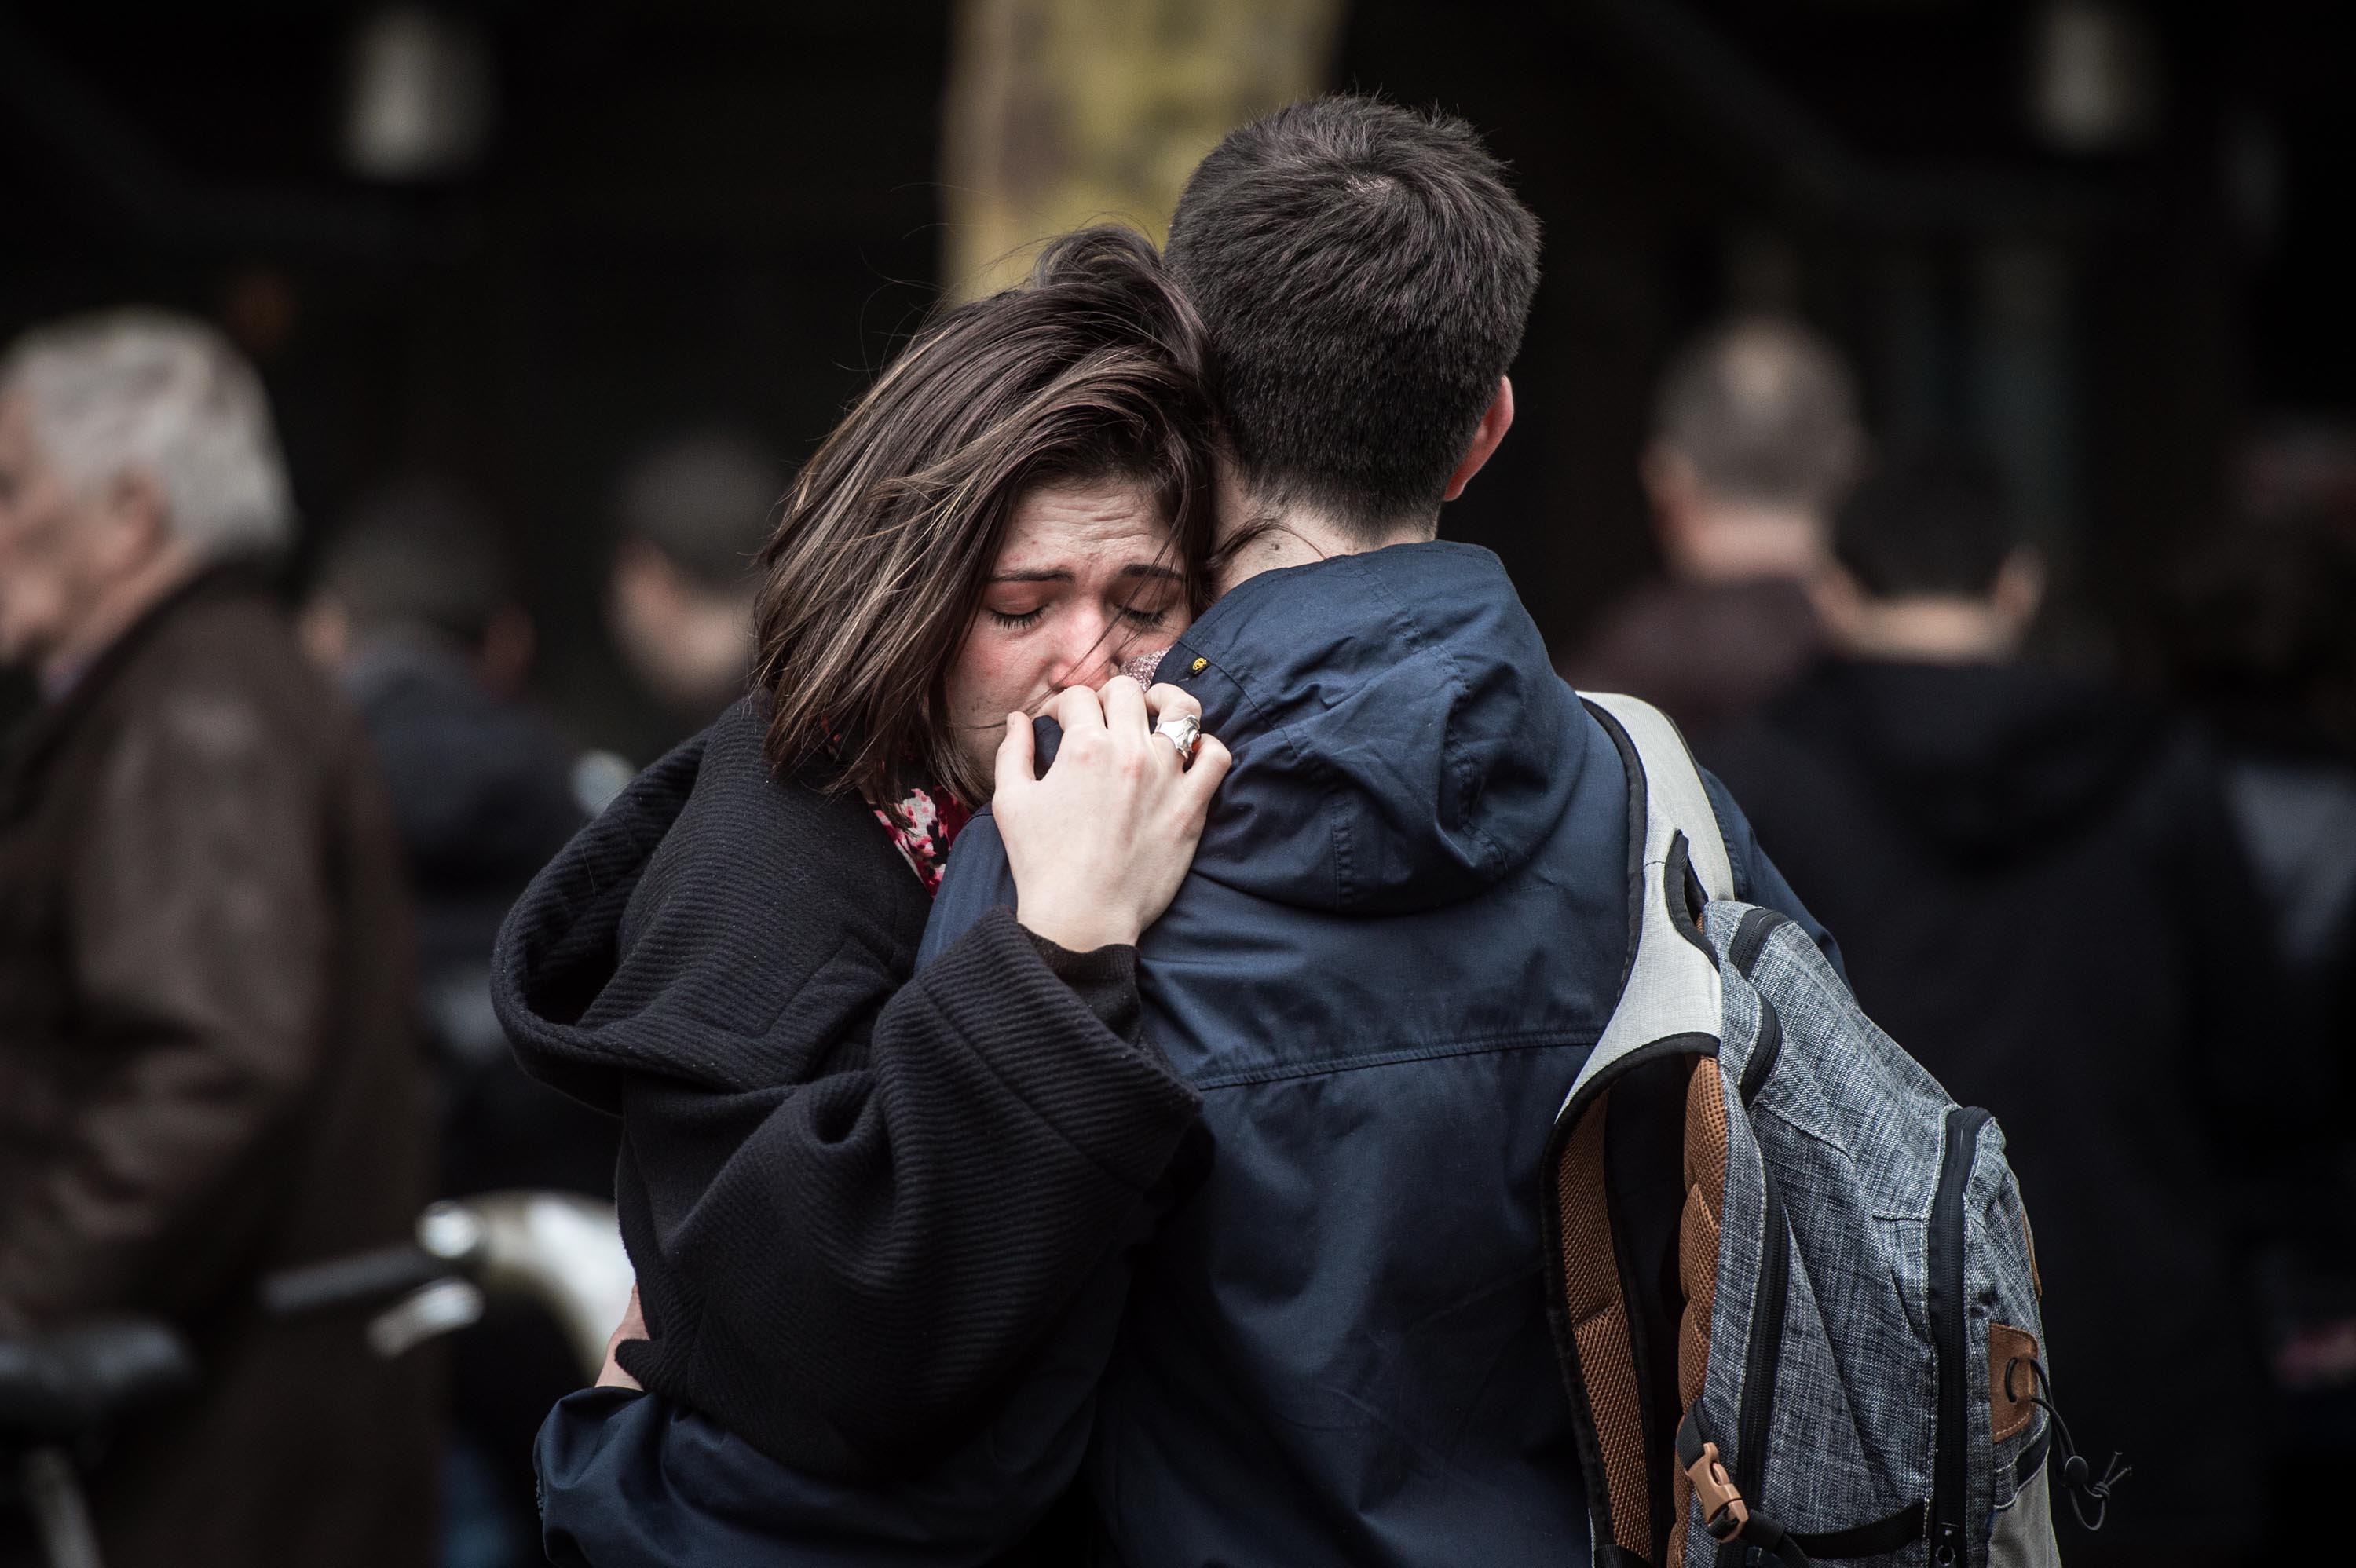 A couple embrace near the Cosa Nostra restaurant in Paris on Nov. 14, 2015. (David Ramos—Getty Images)